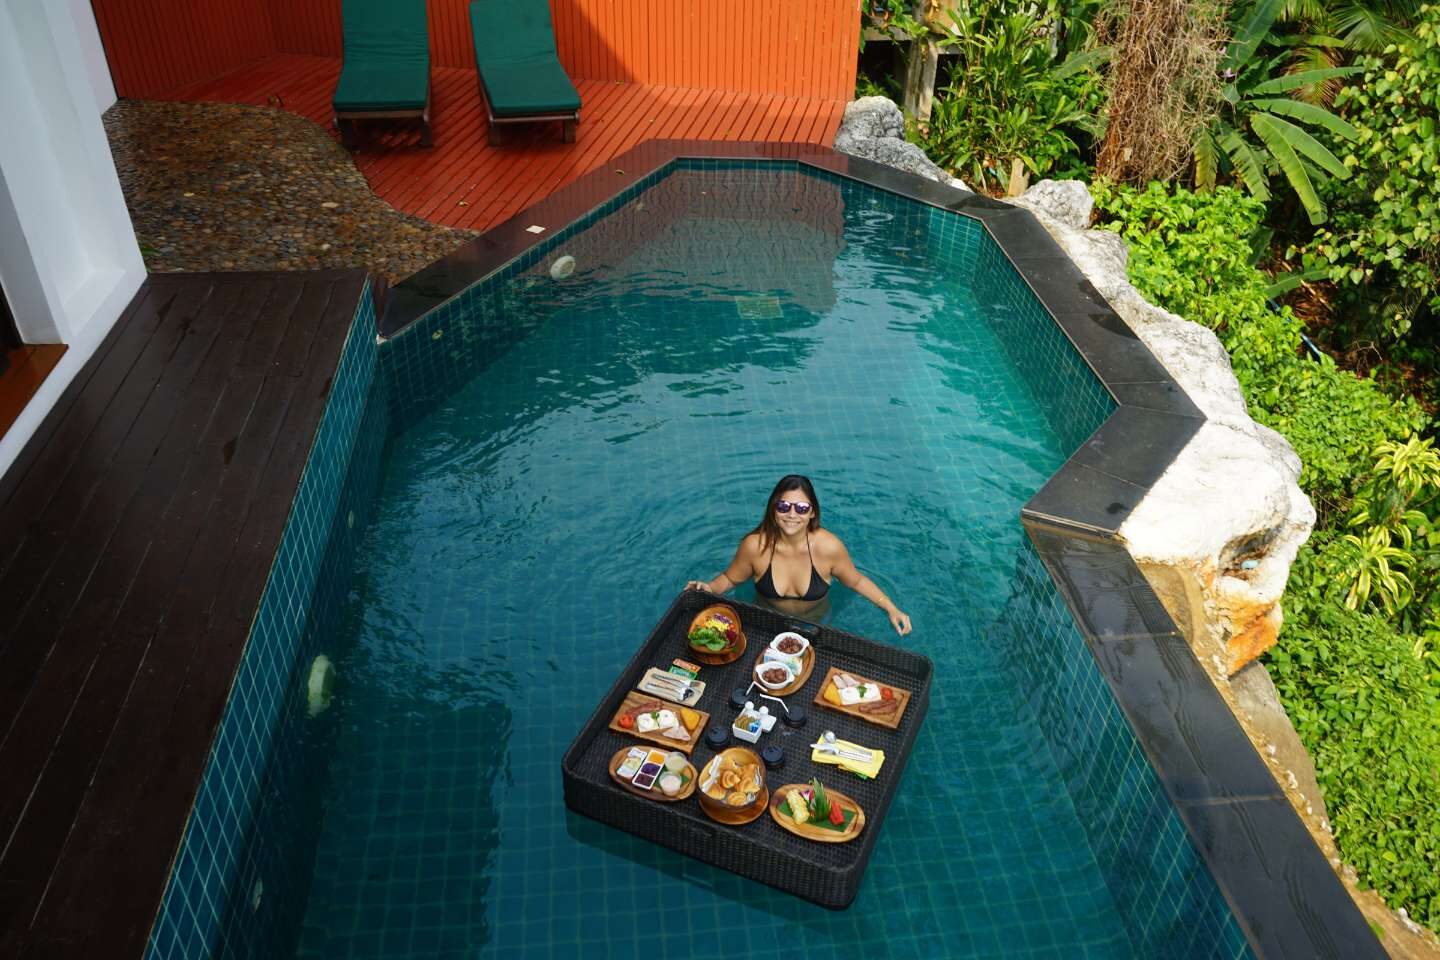 Founder of this blog is enjoying her floating breakfast in Thailand